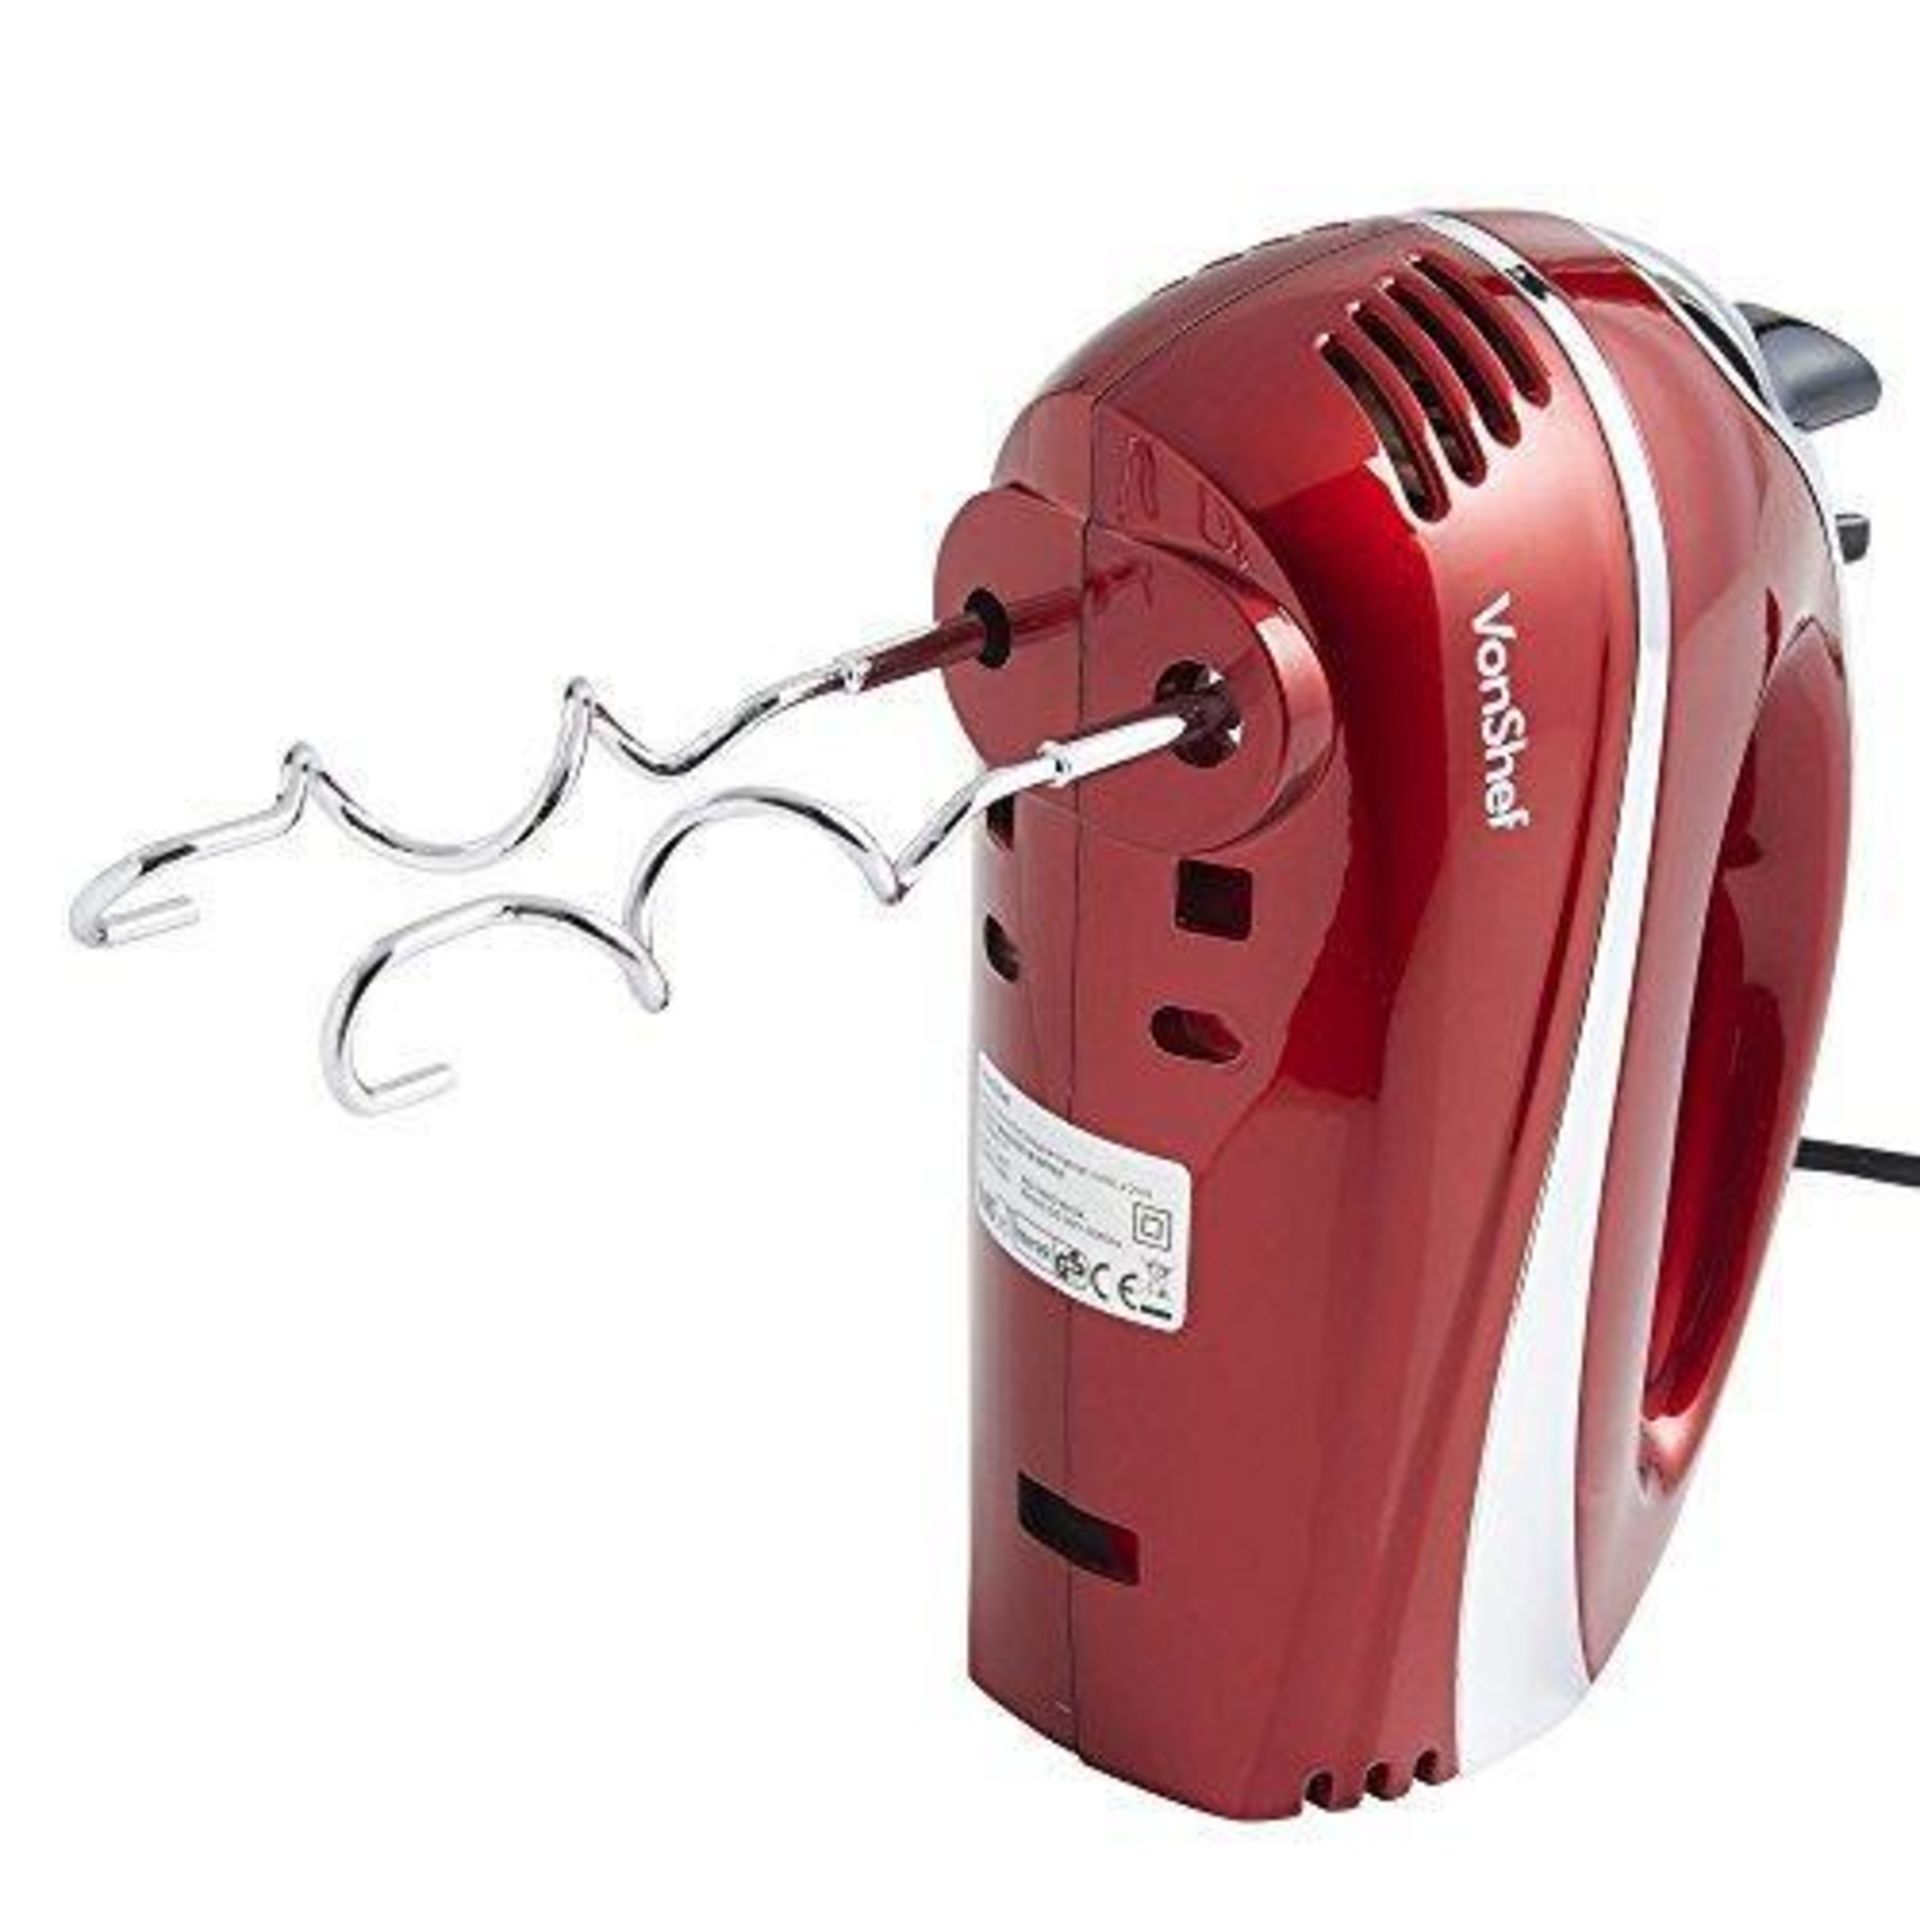 300W Red Hand Mixer - ER51. VonShef Red Hand WhiskThis is the ultimate kitchen appliance if you love - Image 2 of 4